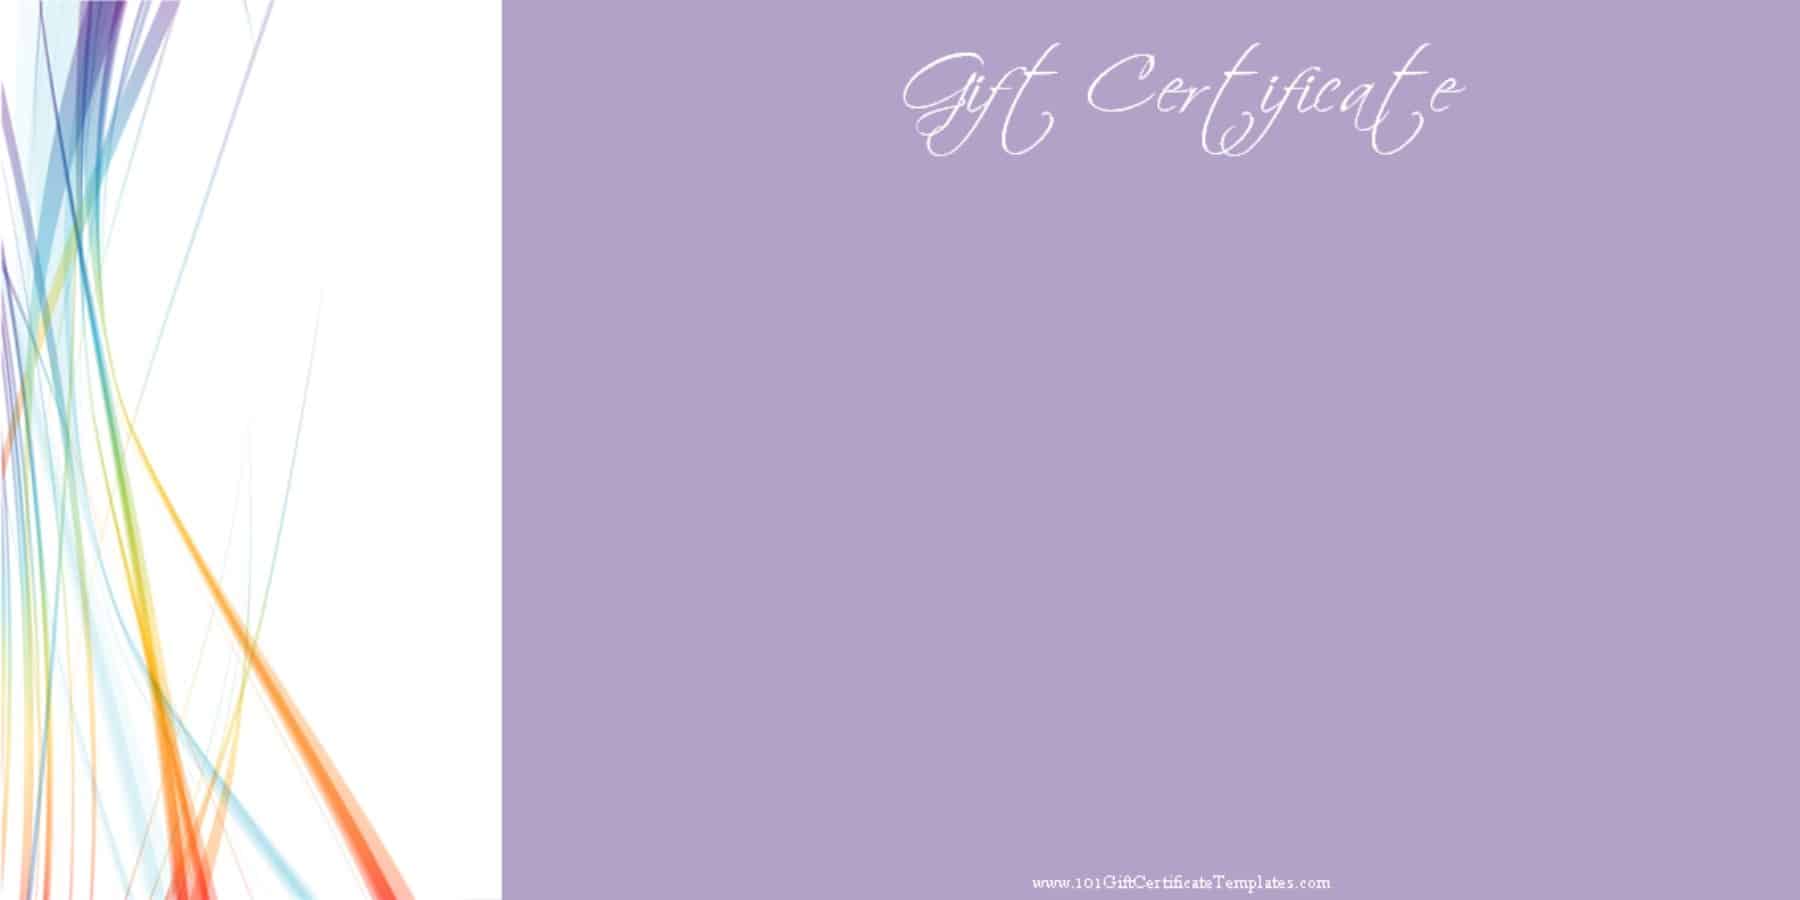 Printable Gift Certificate Templates